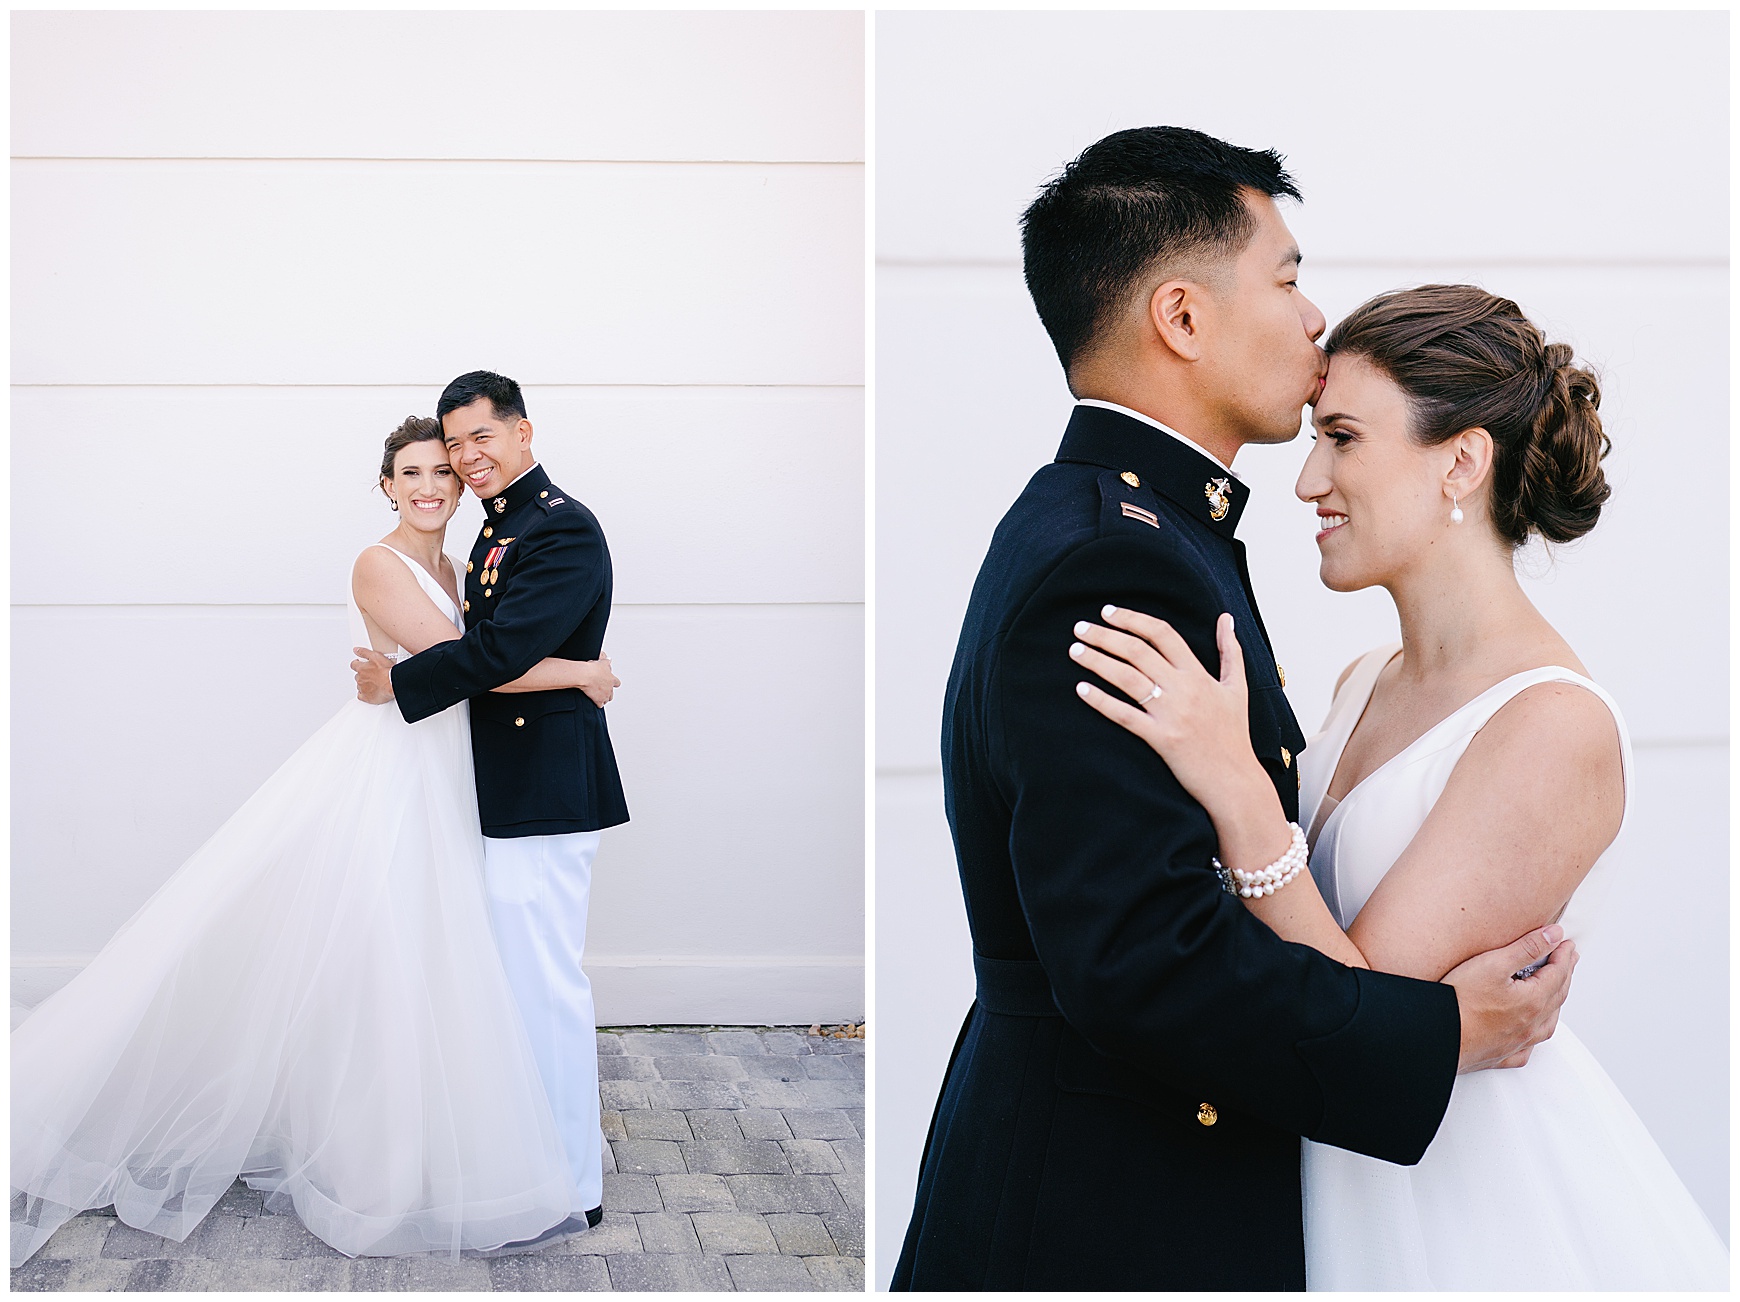 Bride and Groom portraits